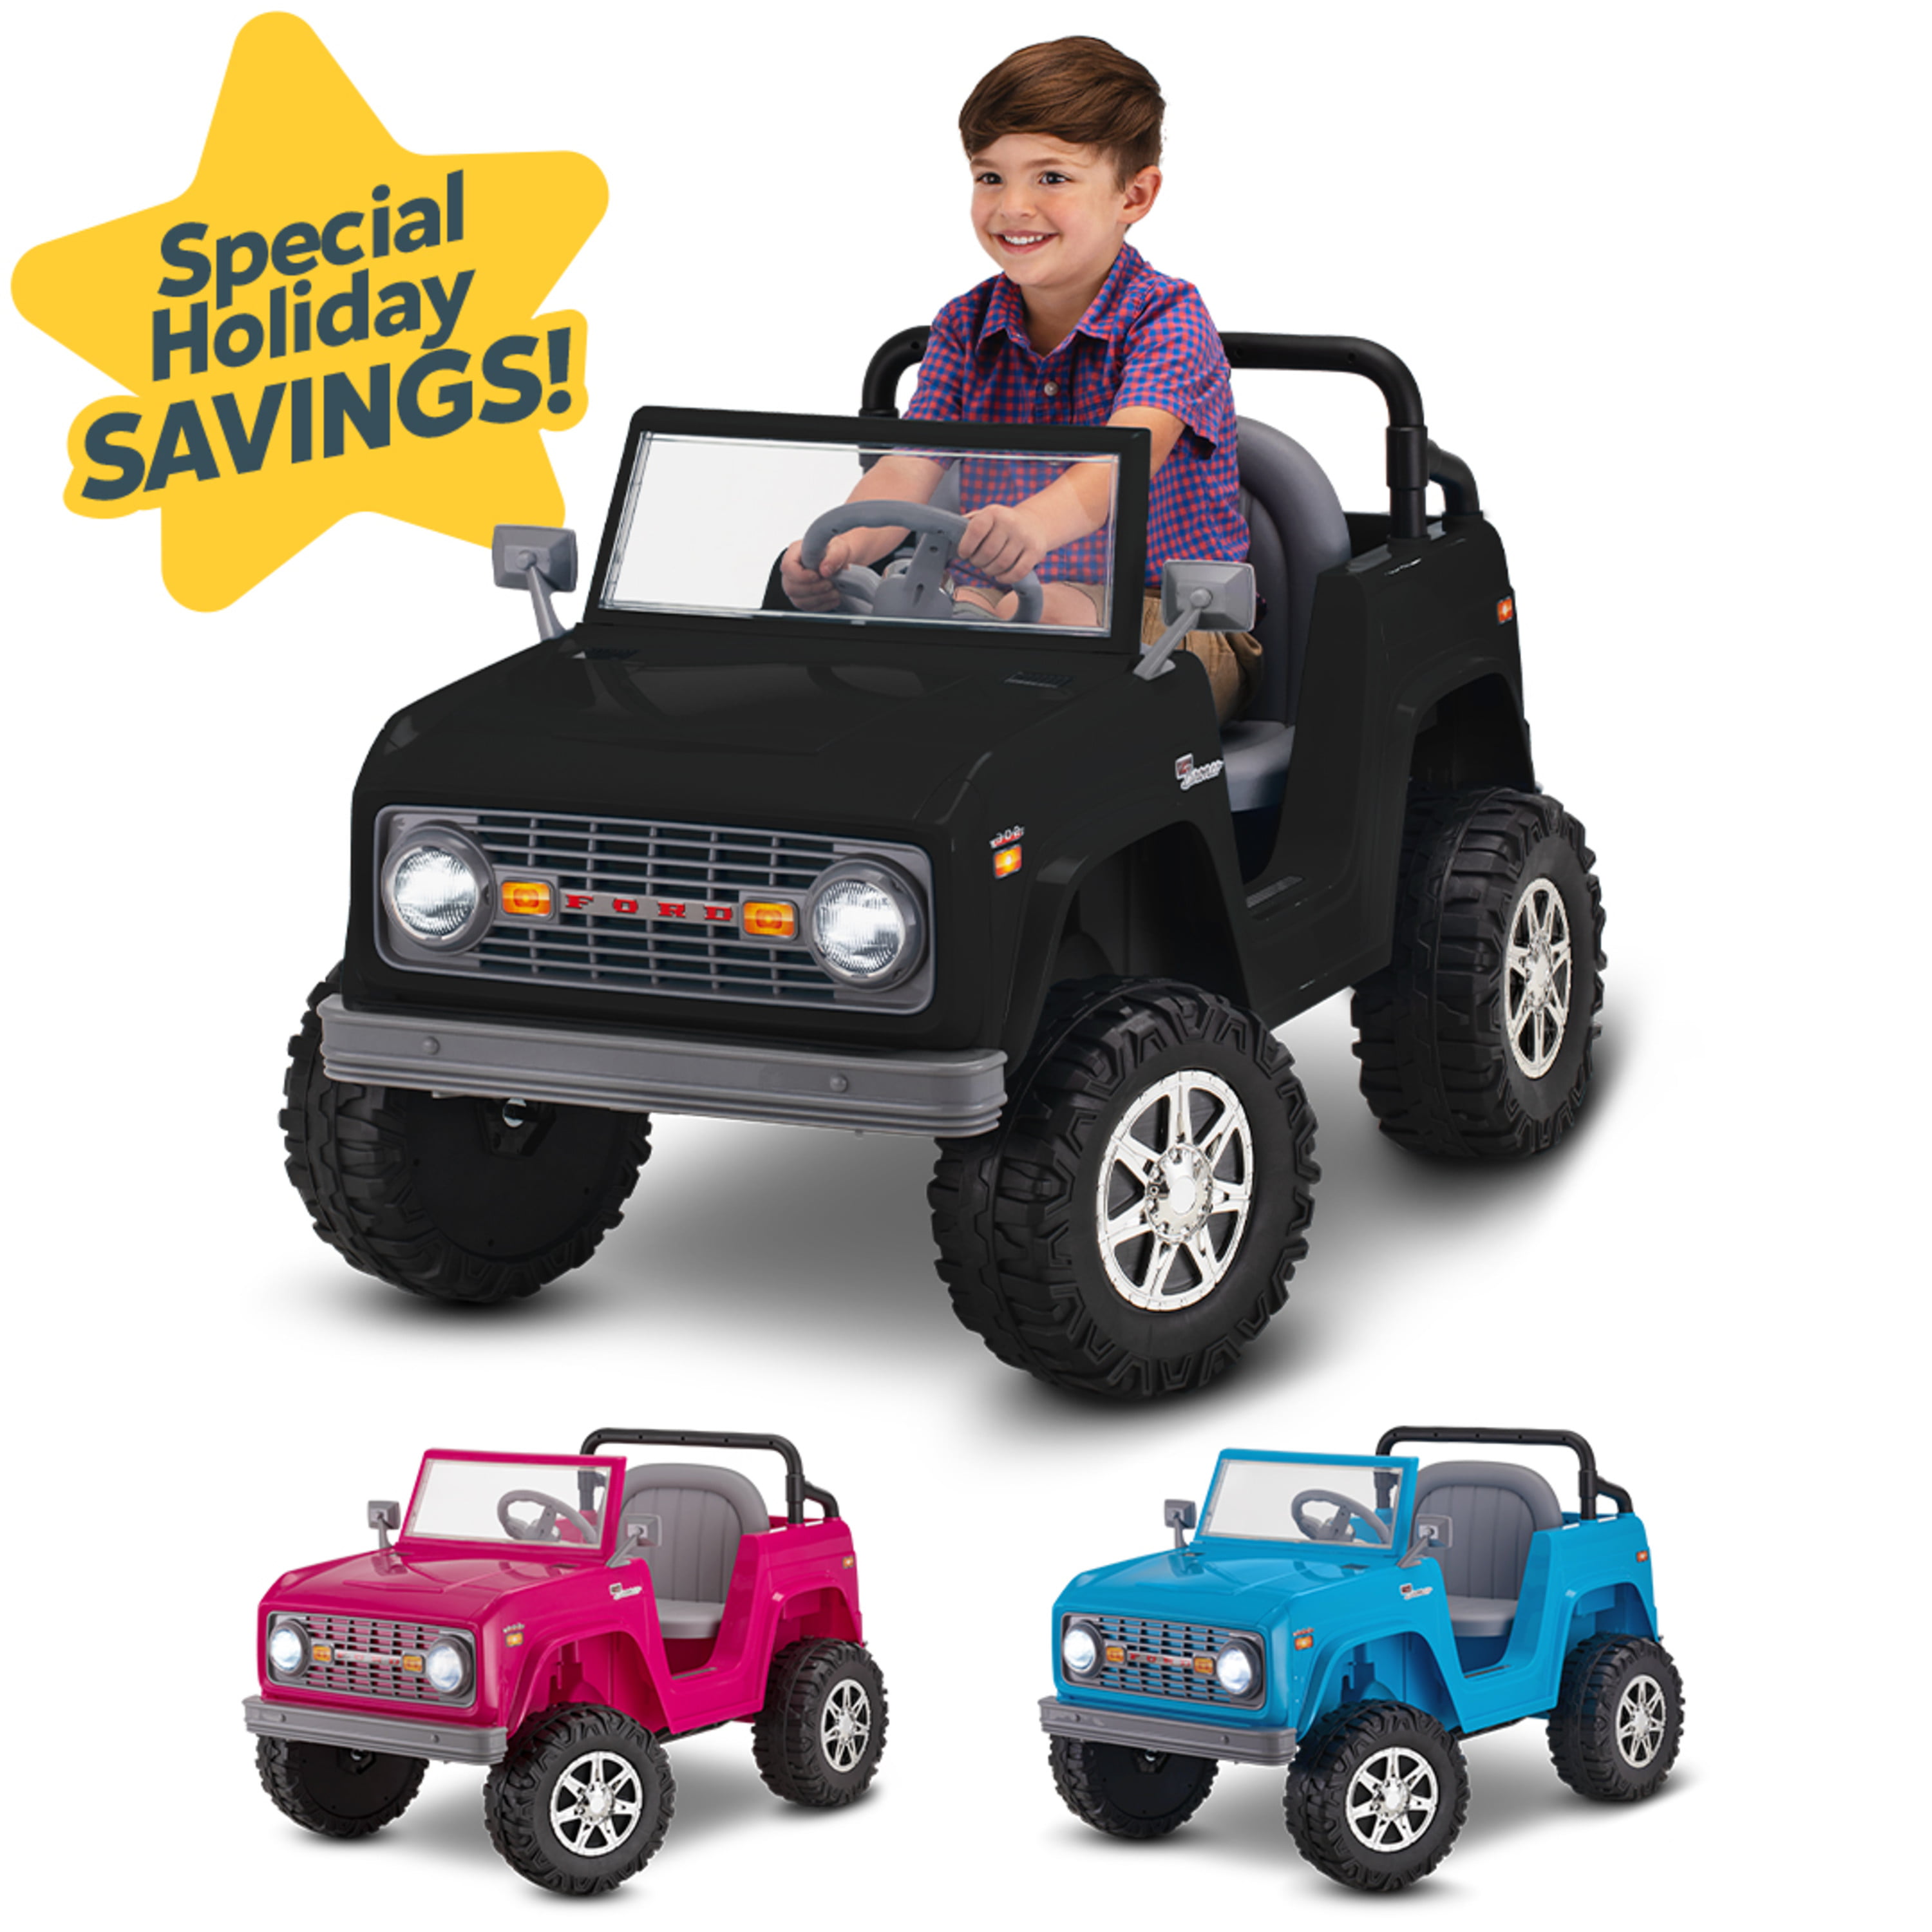 6-Volt Kid Trax Classic Ford Bronco Ride On Vehicle (Black) $89 + Free Shipping